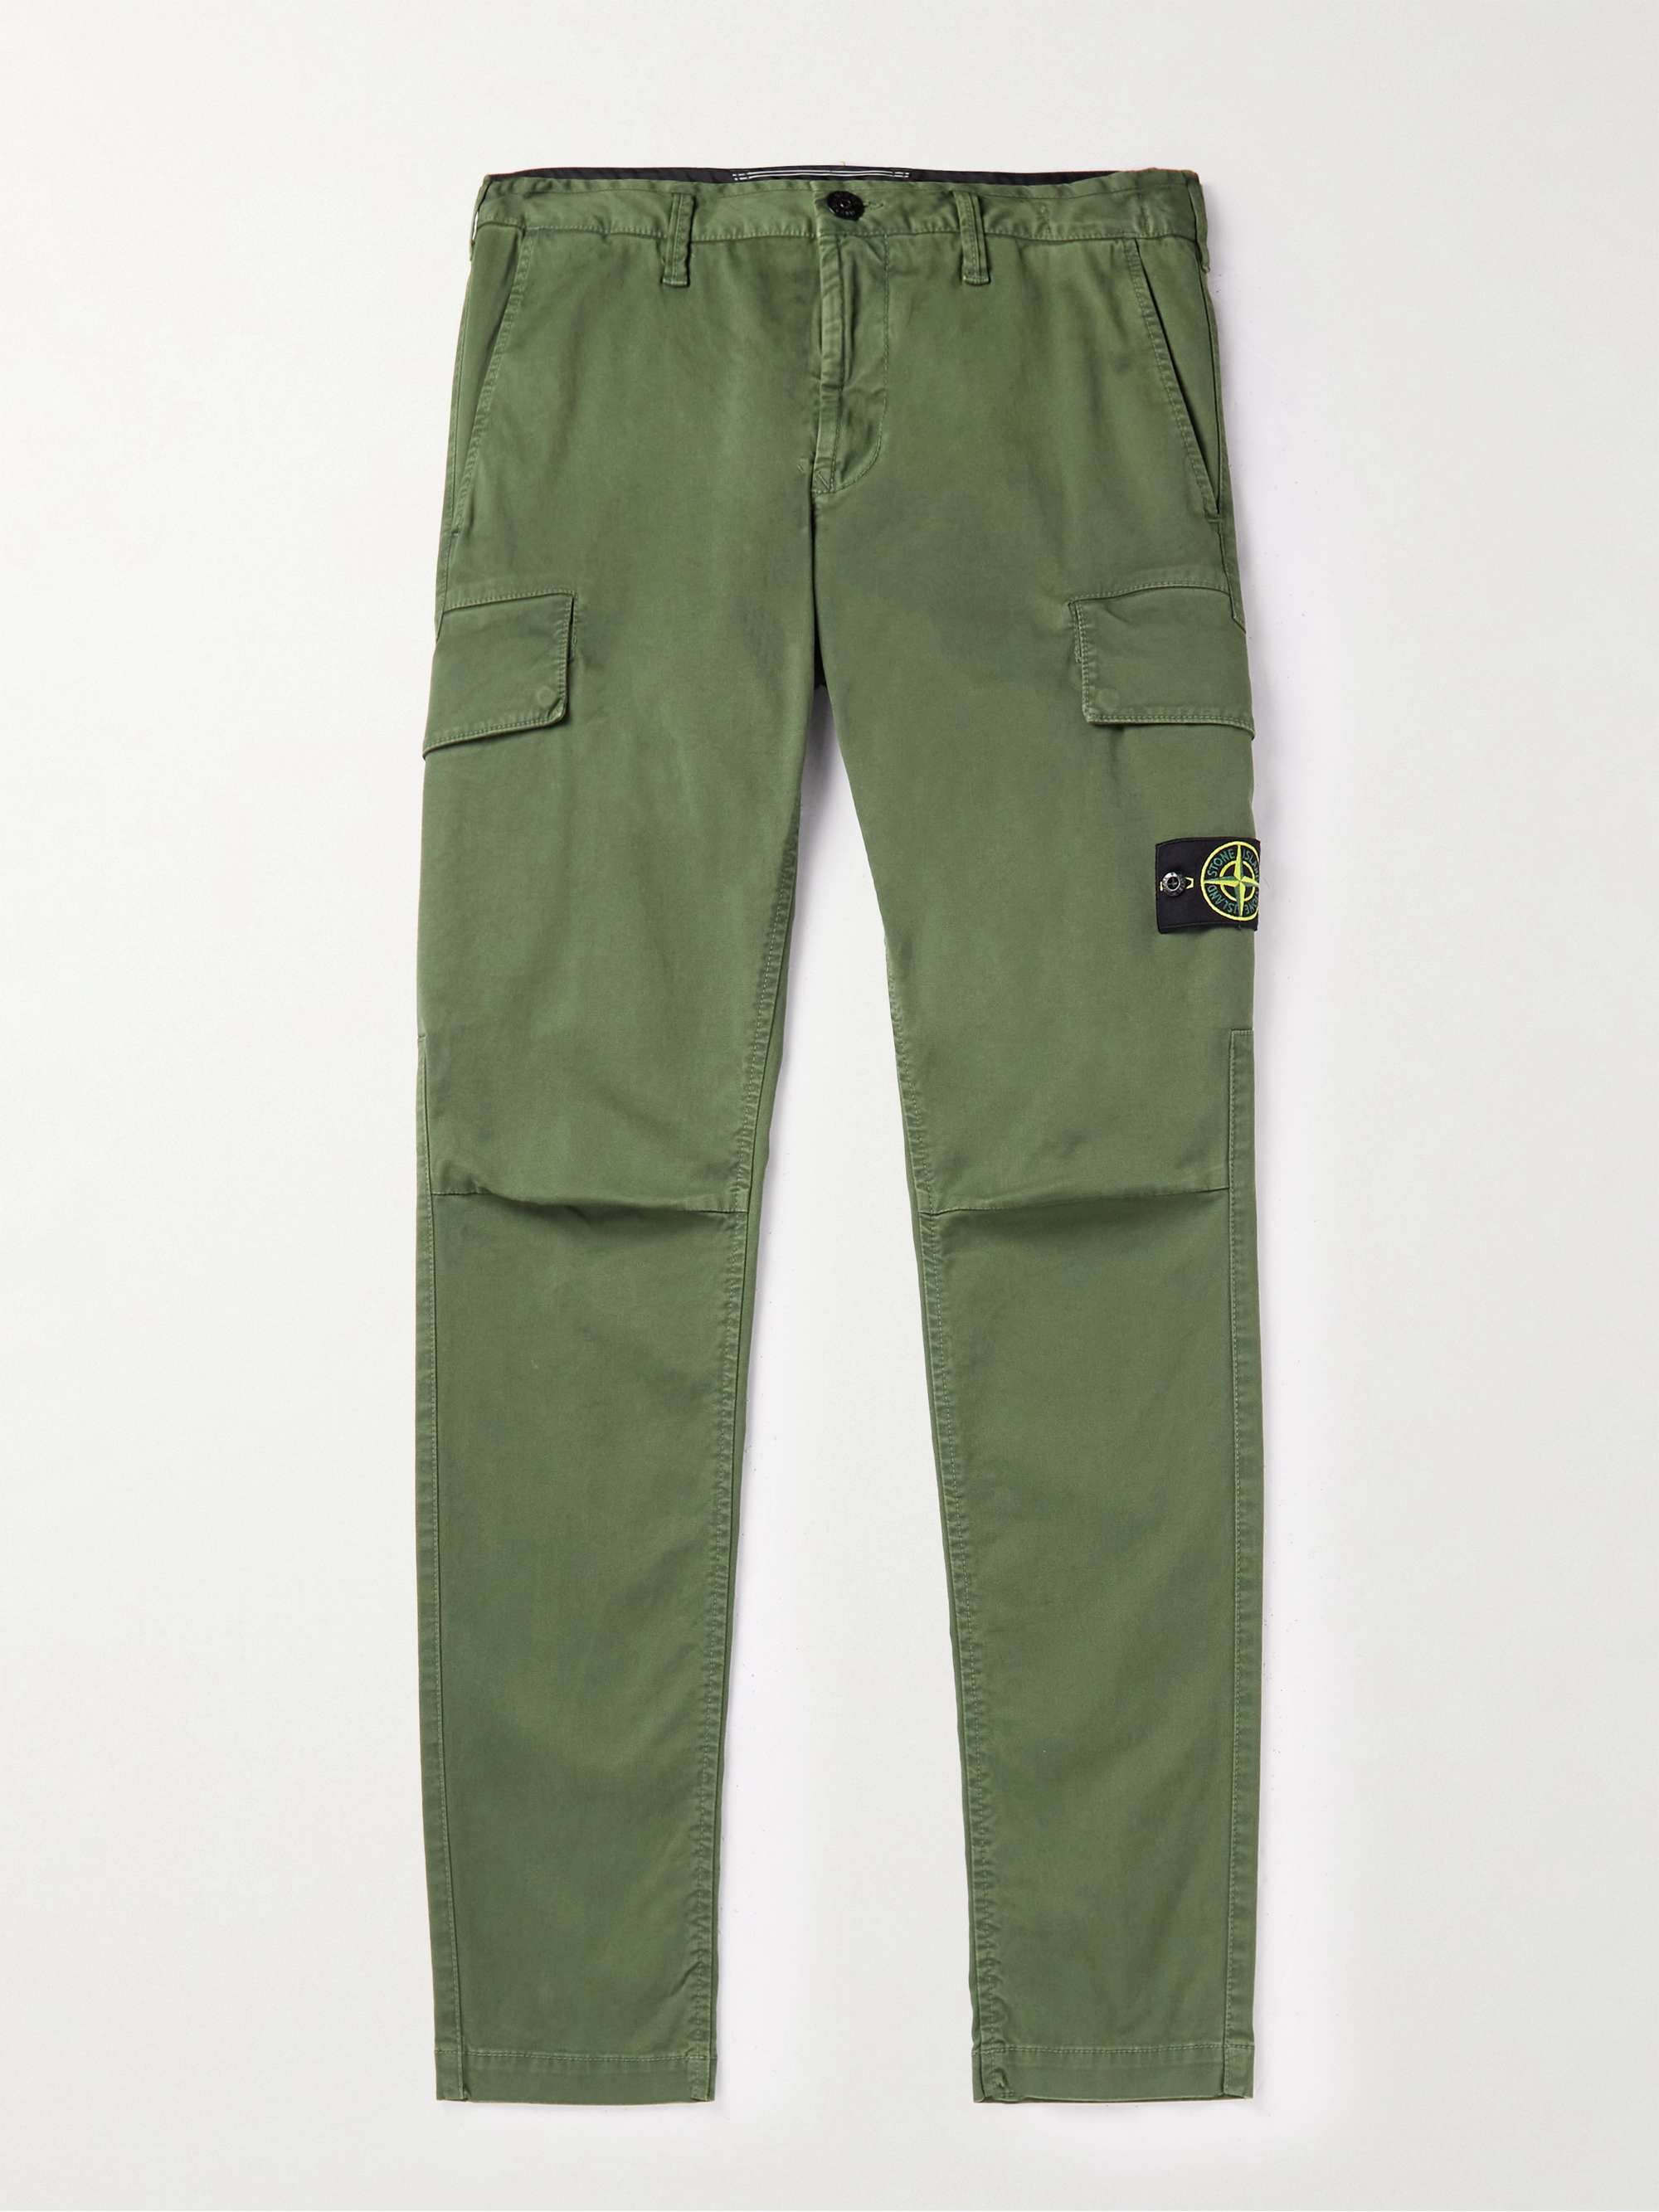 STONE ISLAND Slim-Fit Garment-Dyed Cotton-Blend Twill Cargo Trousers for Men  | MR PORTER